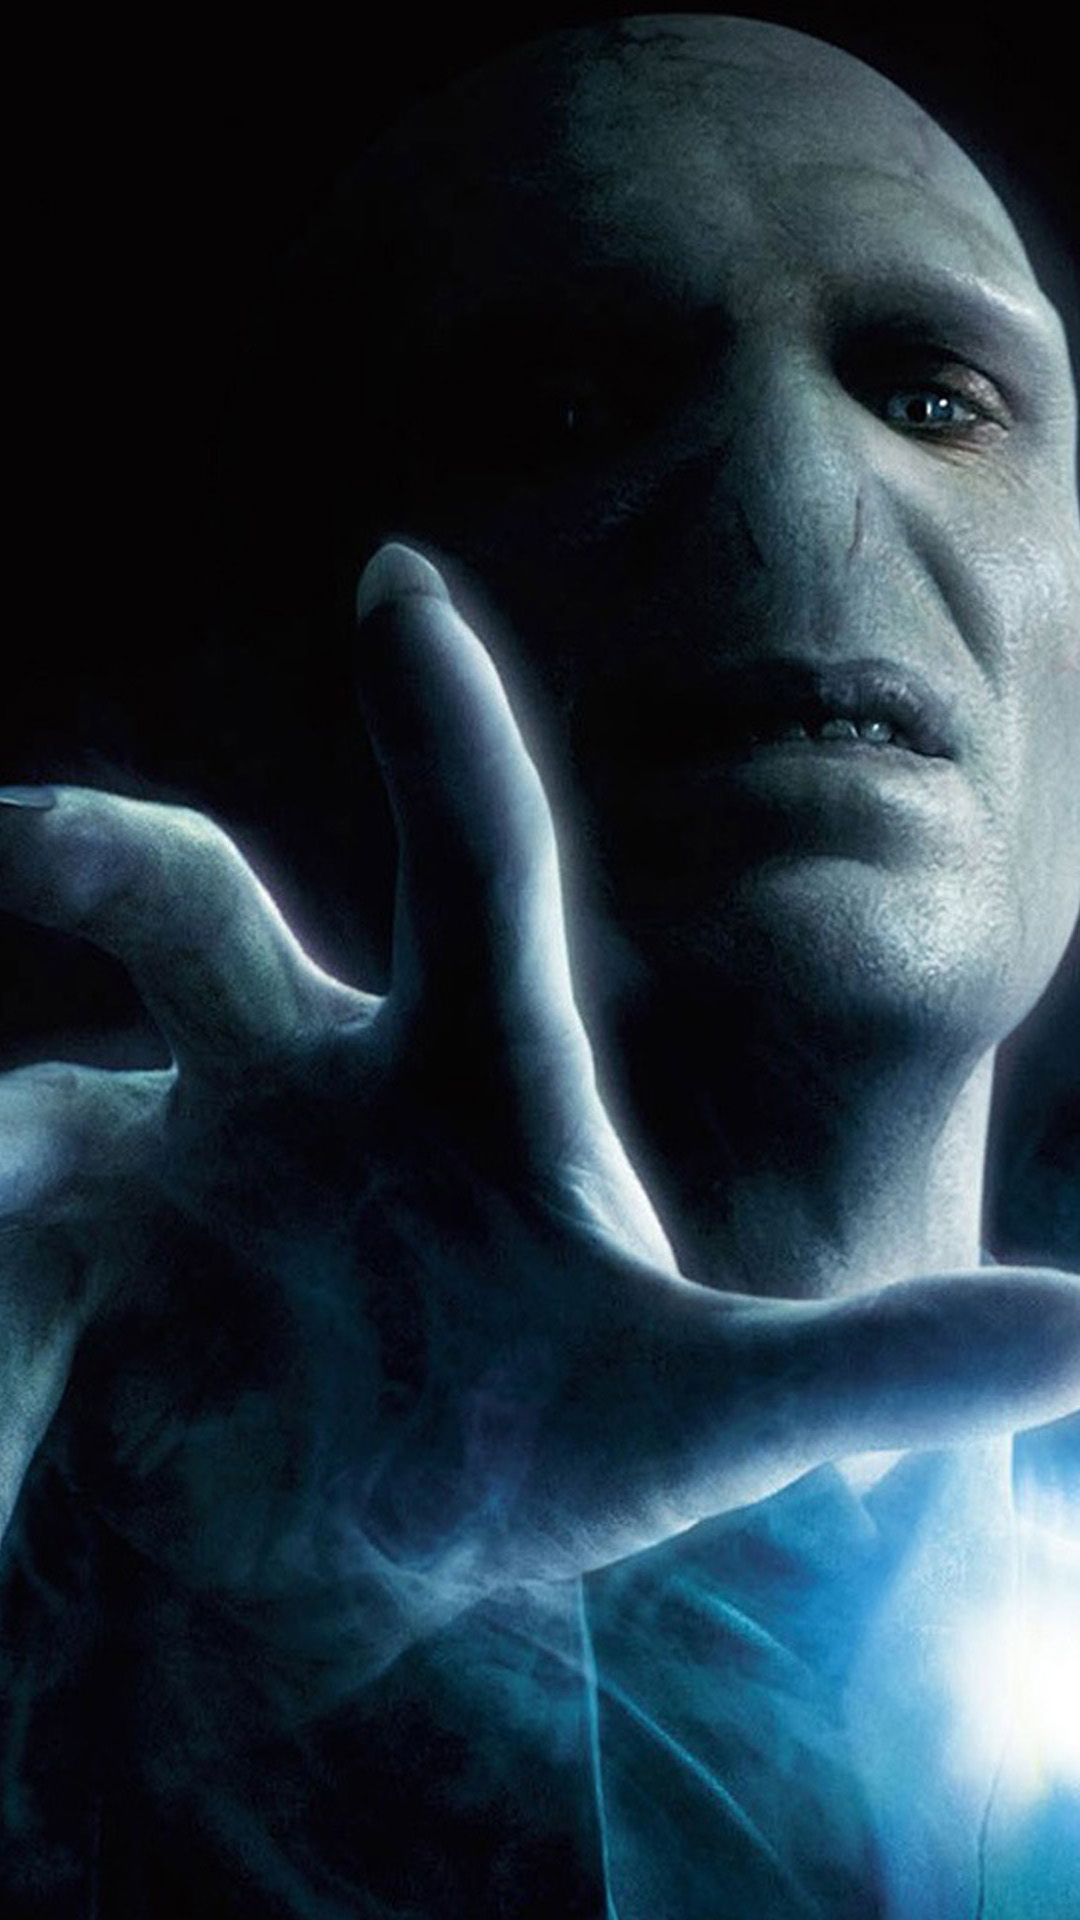 Lord Voldemort Wallpapers for Samsung Galaxy S5